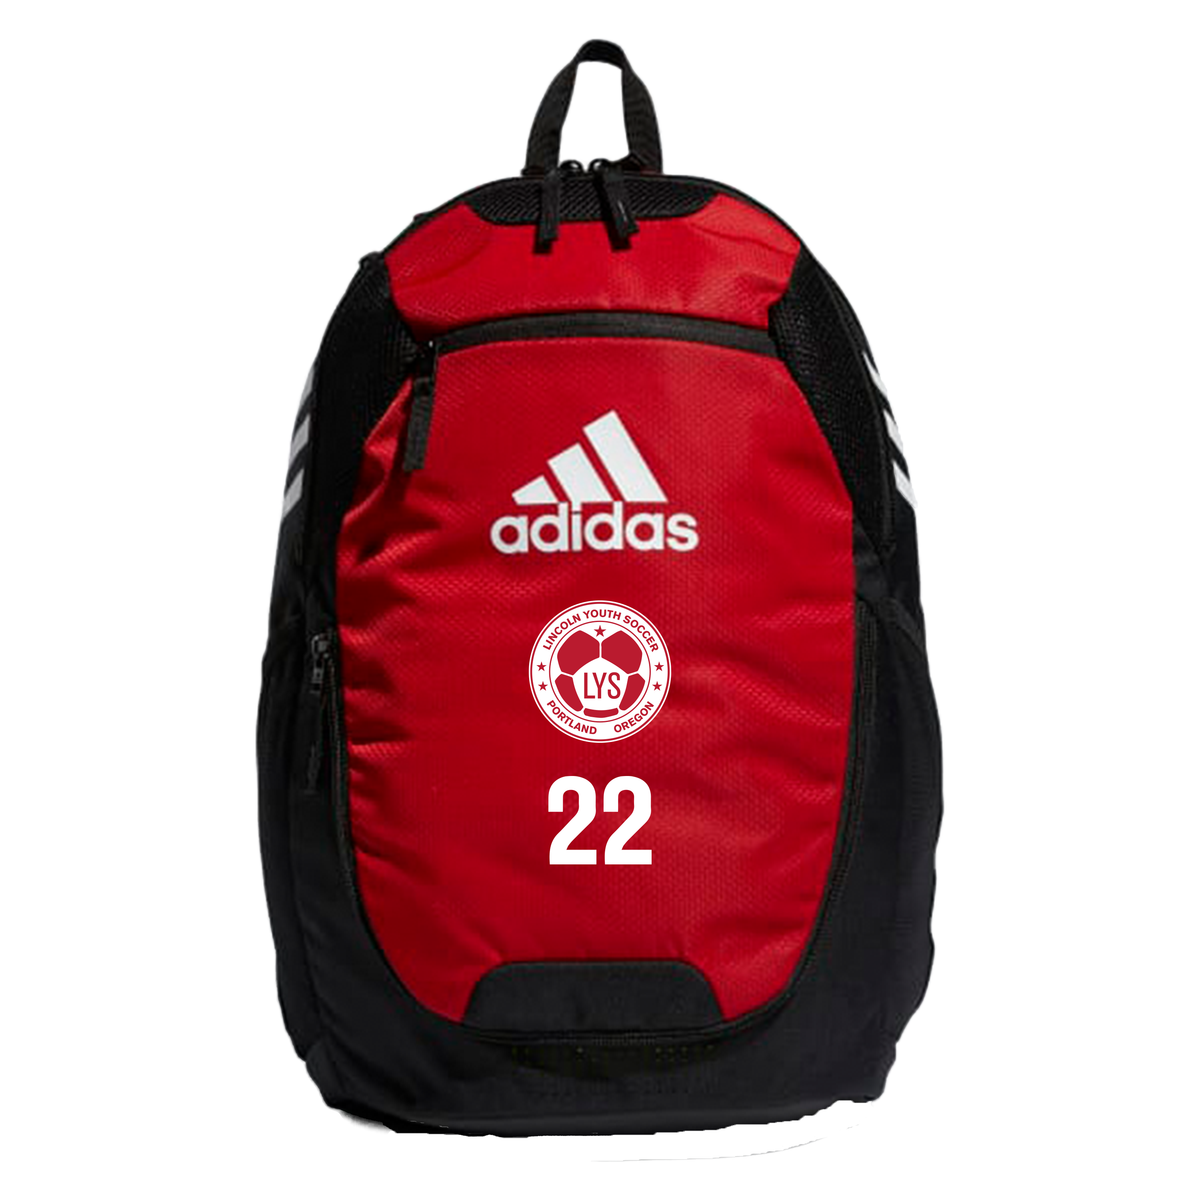 Youth Backpack – Tursi Soccer Store